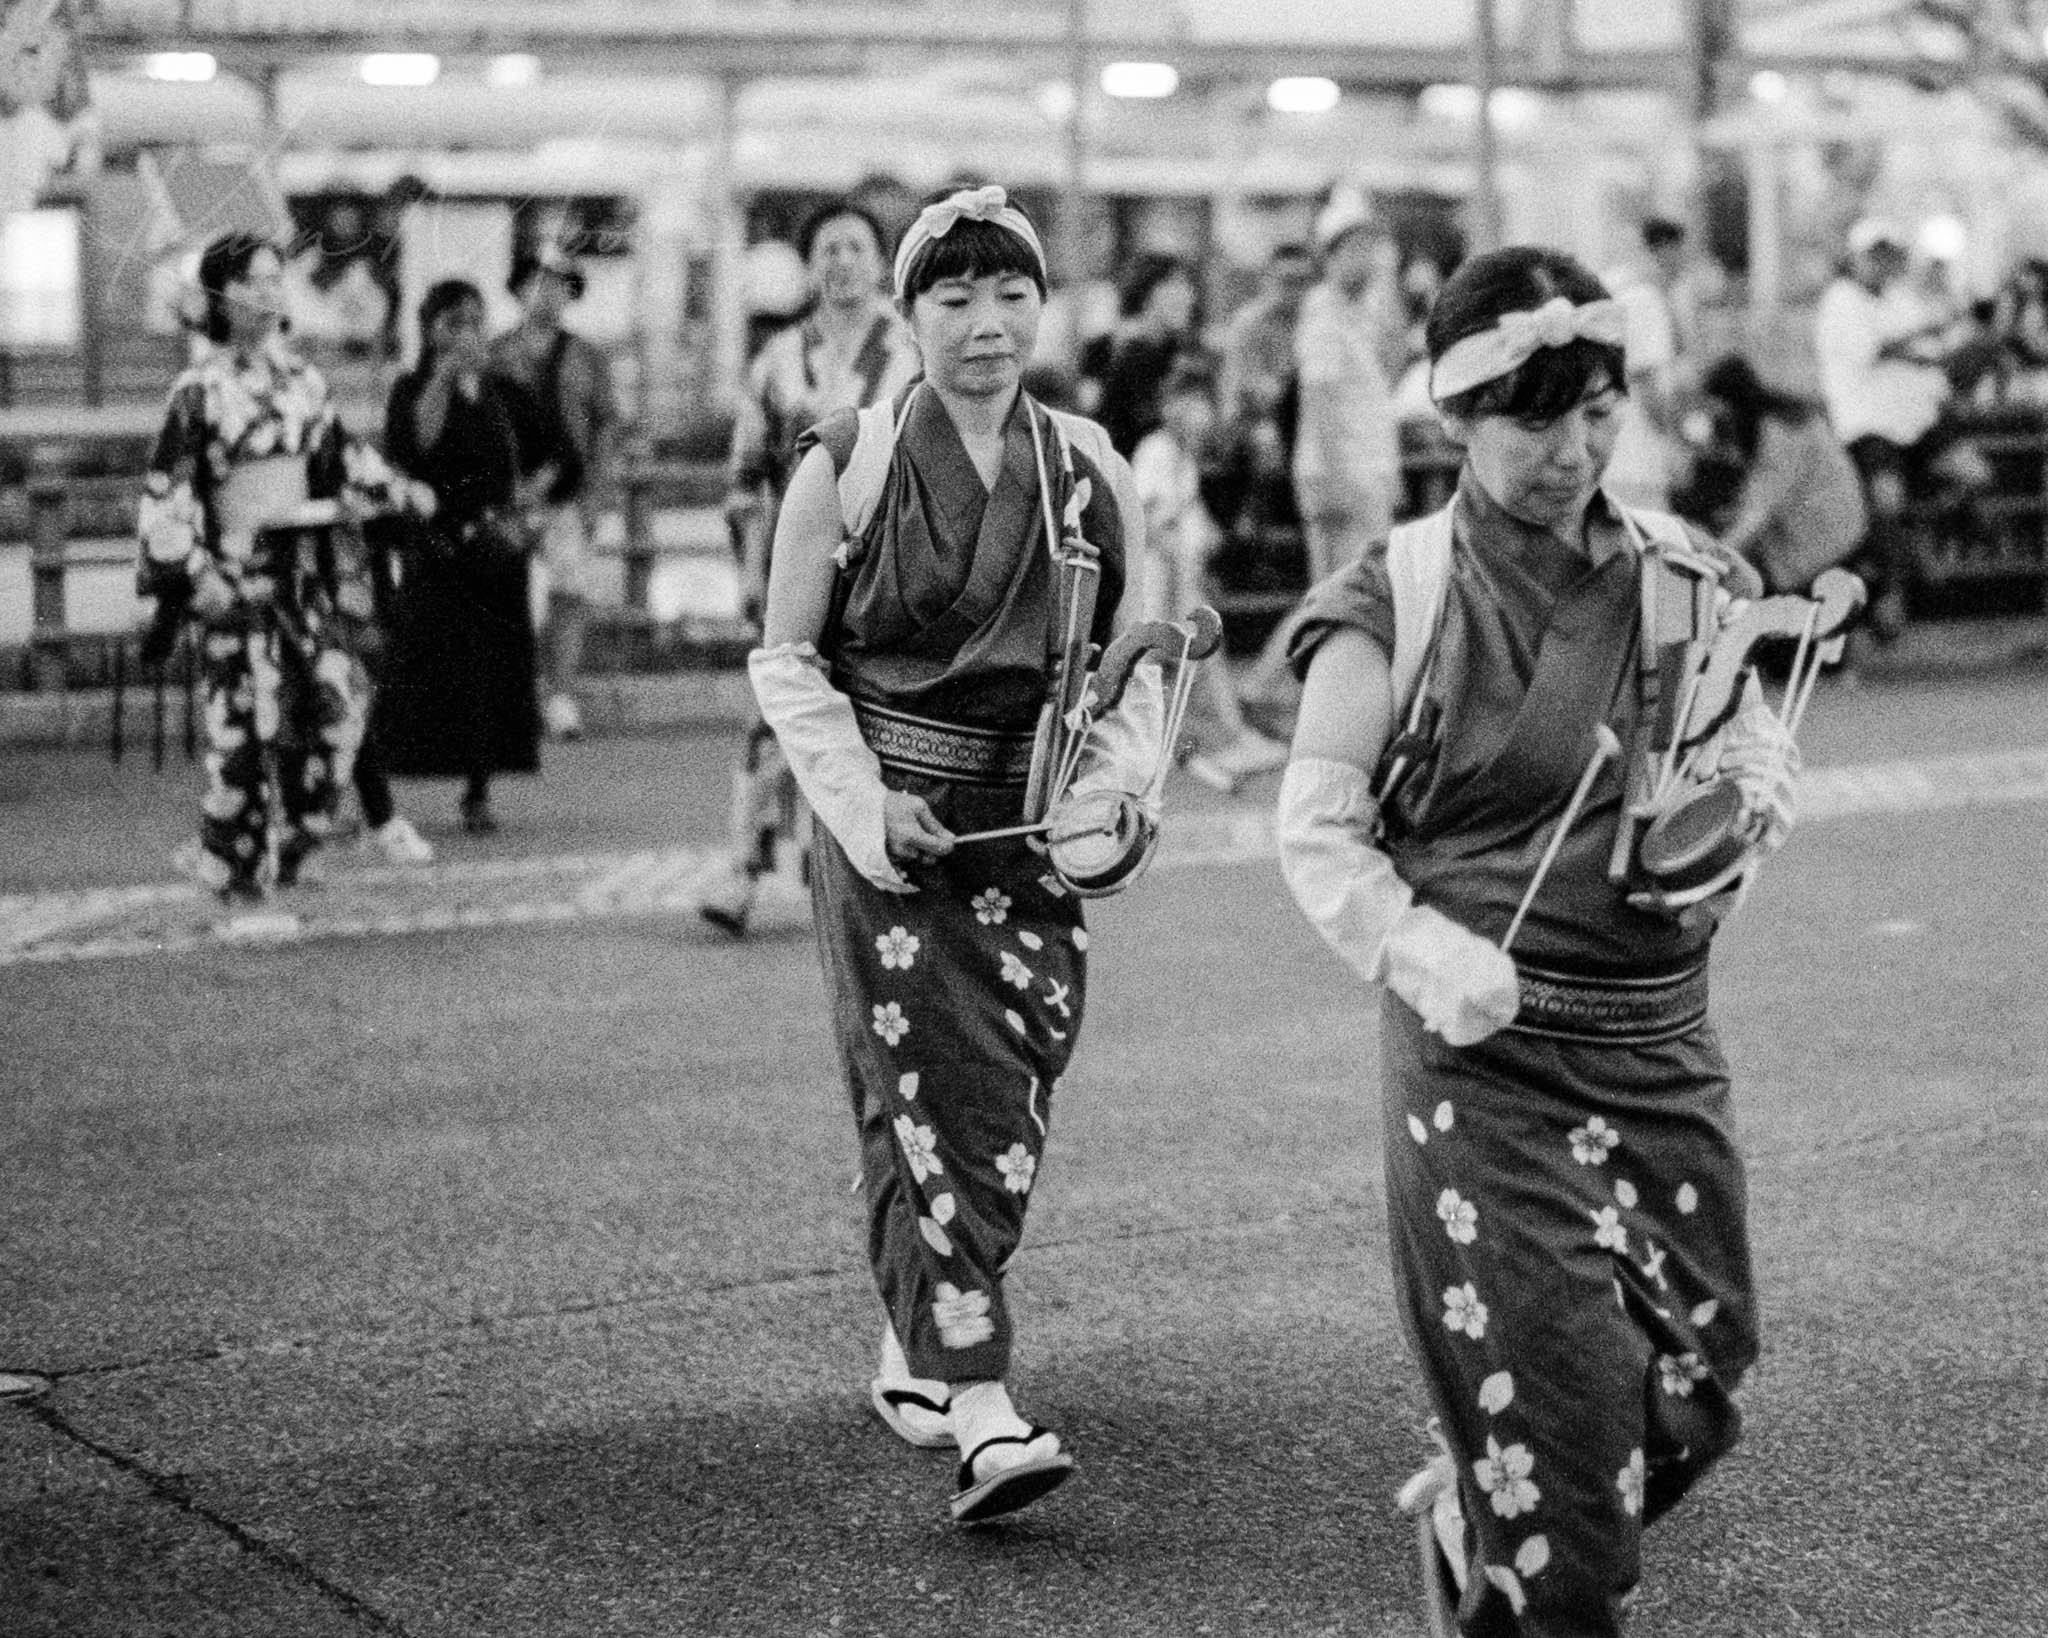 Jangara in traditional attire at a nighttime Japanese festival, captured in black and white.